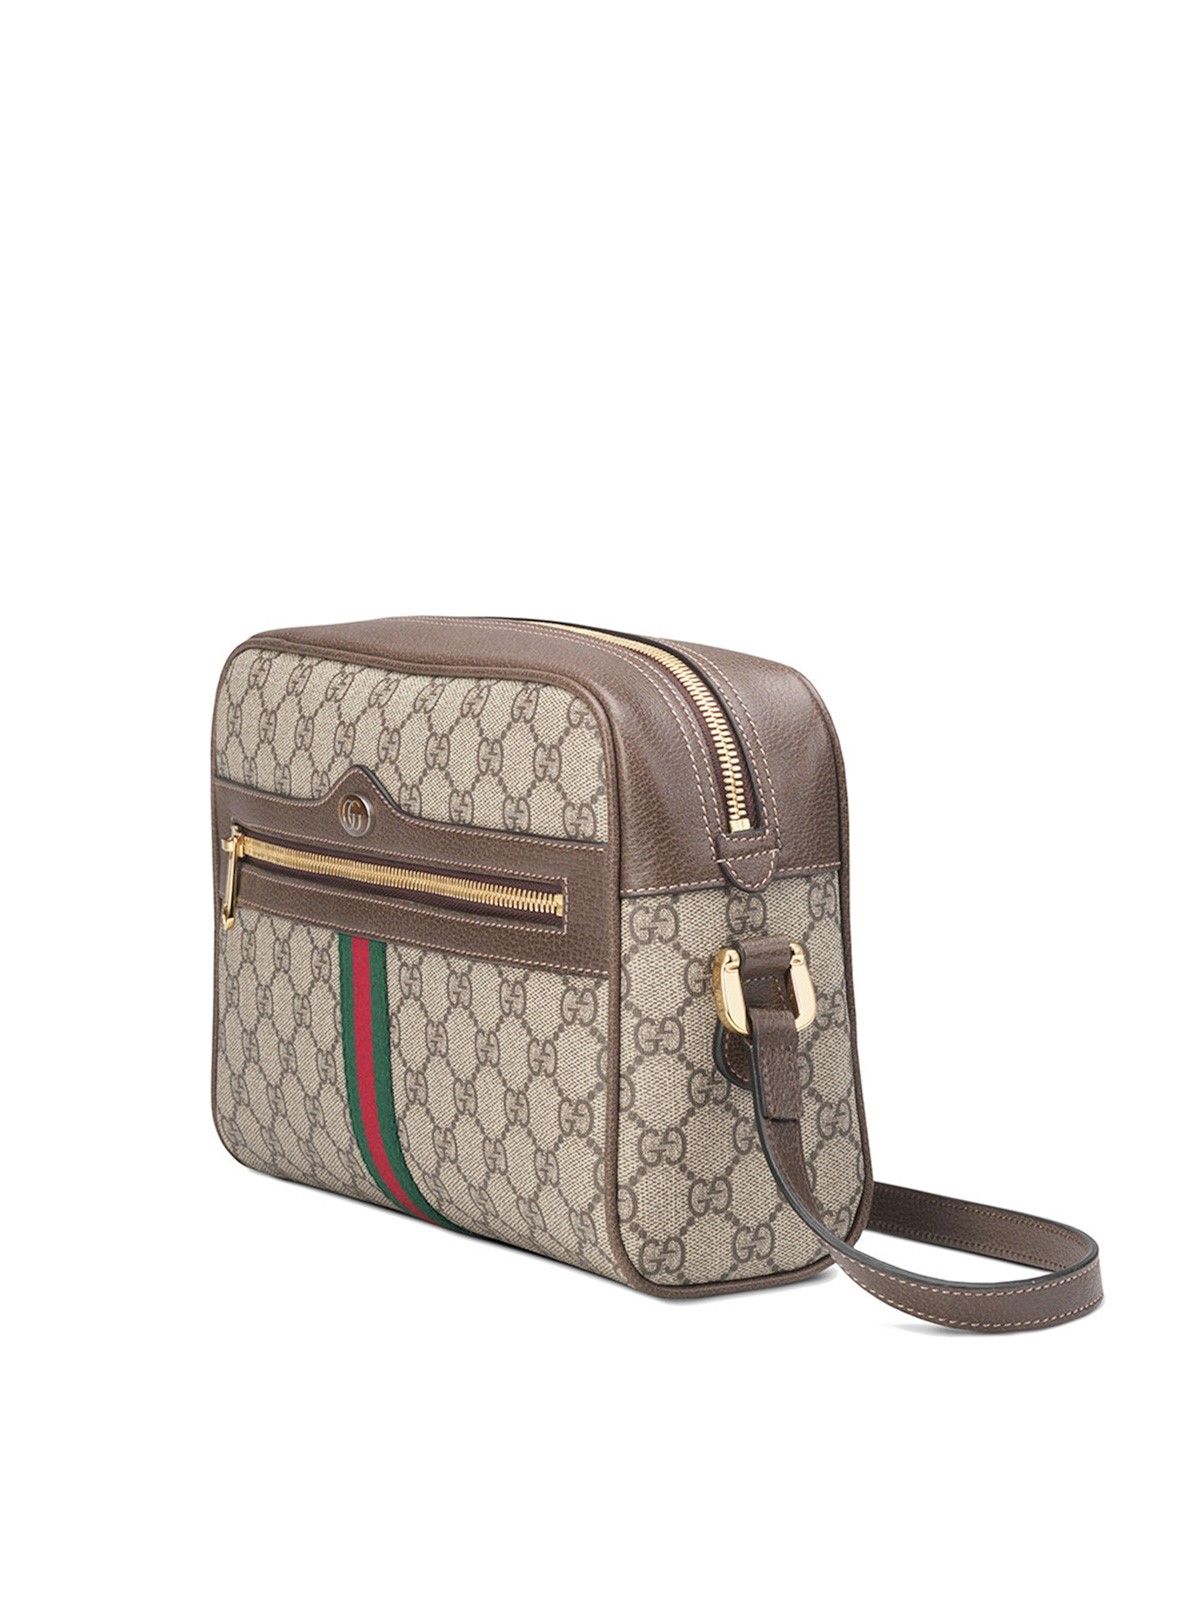 gucci OPHIDIA SHOULDER BAG available on www.neverfullmm.com - 22340